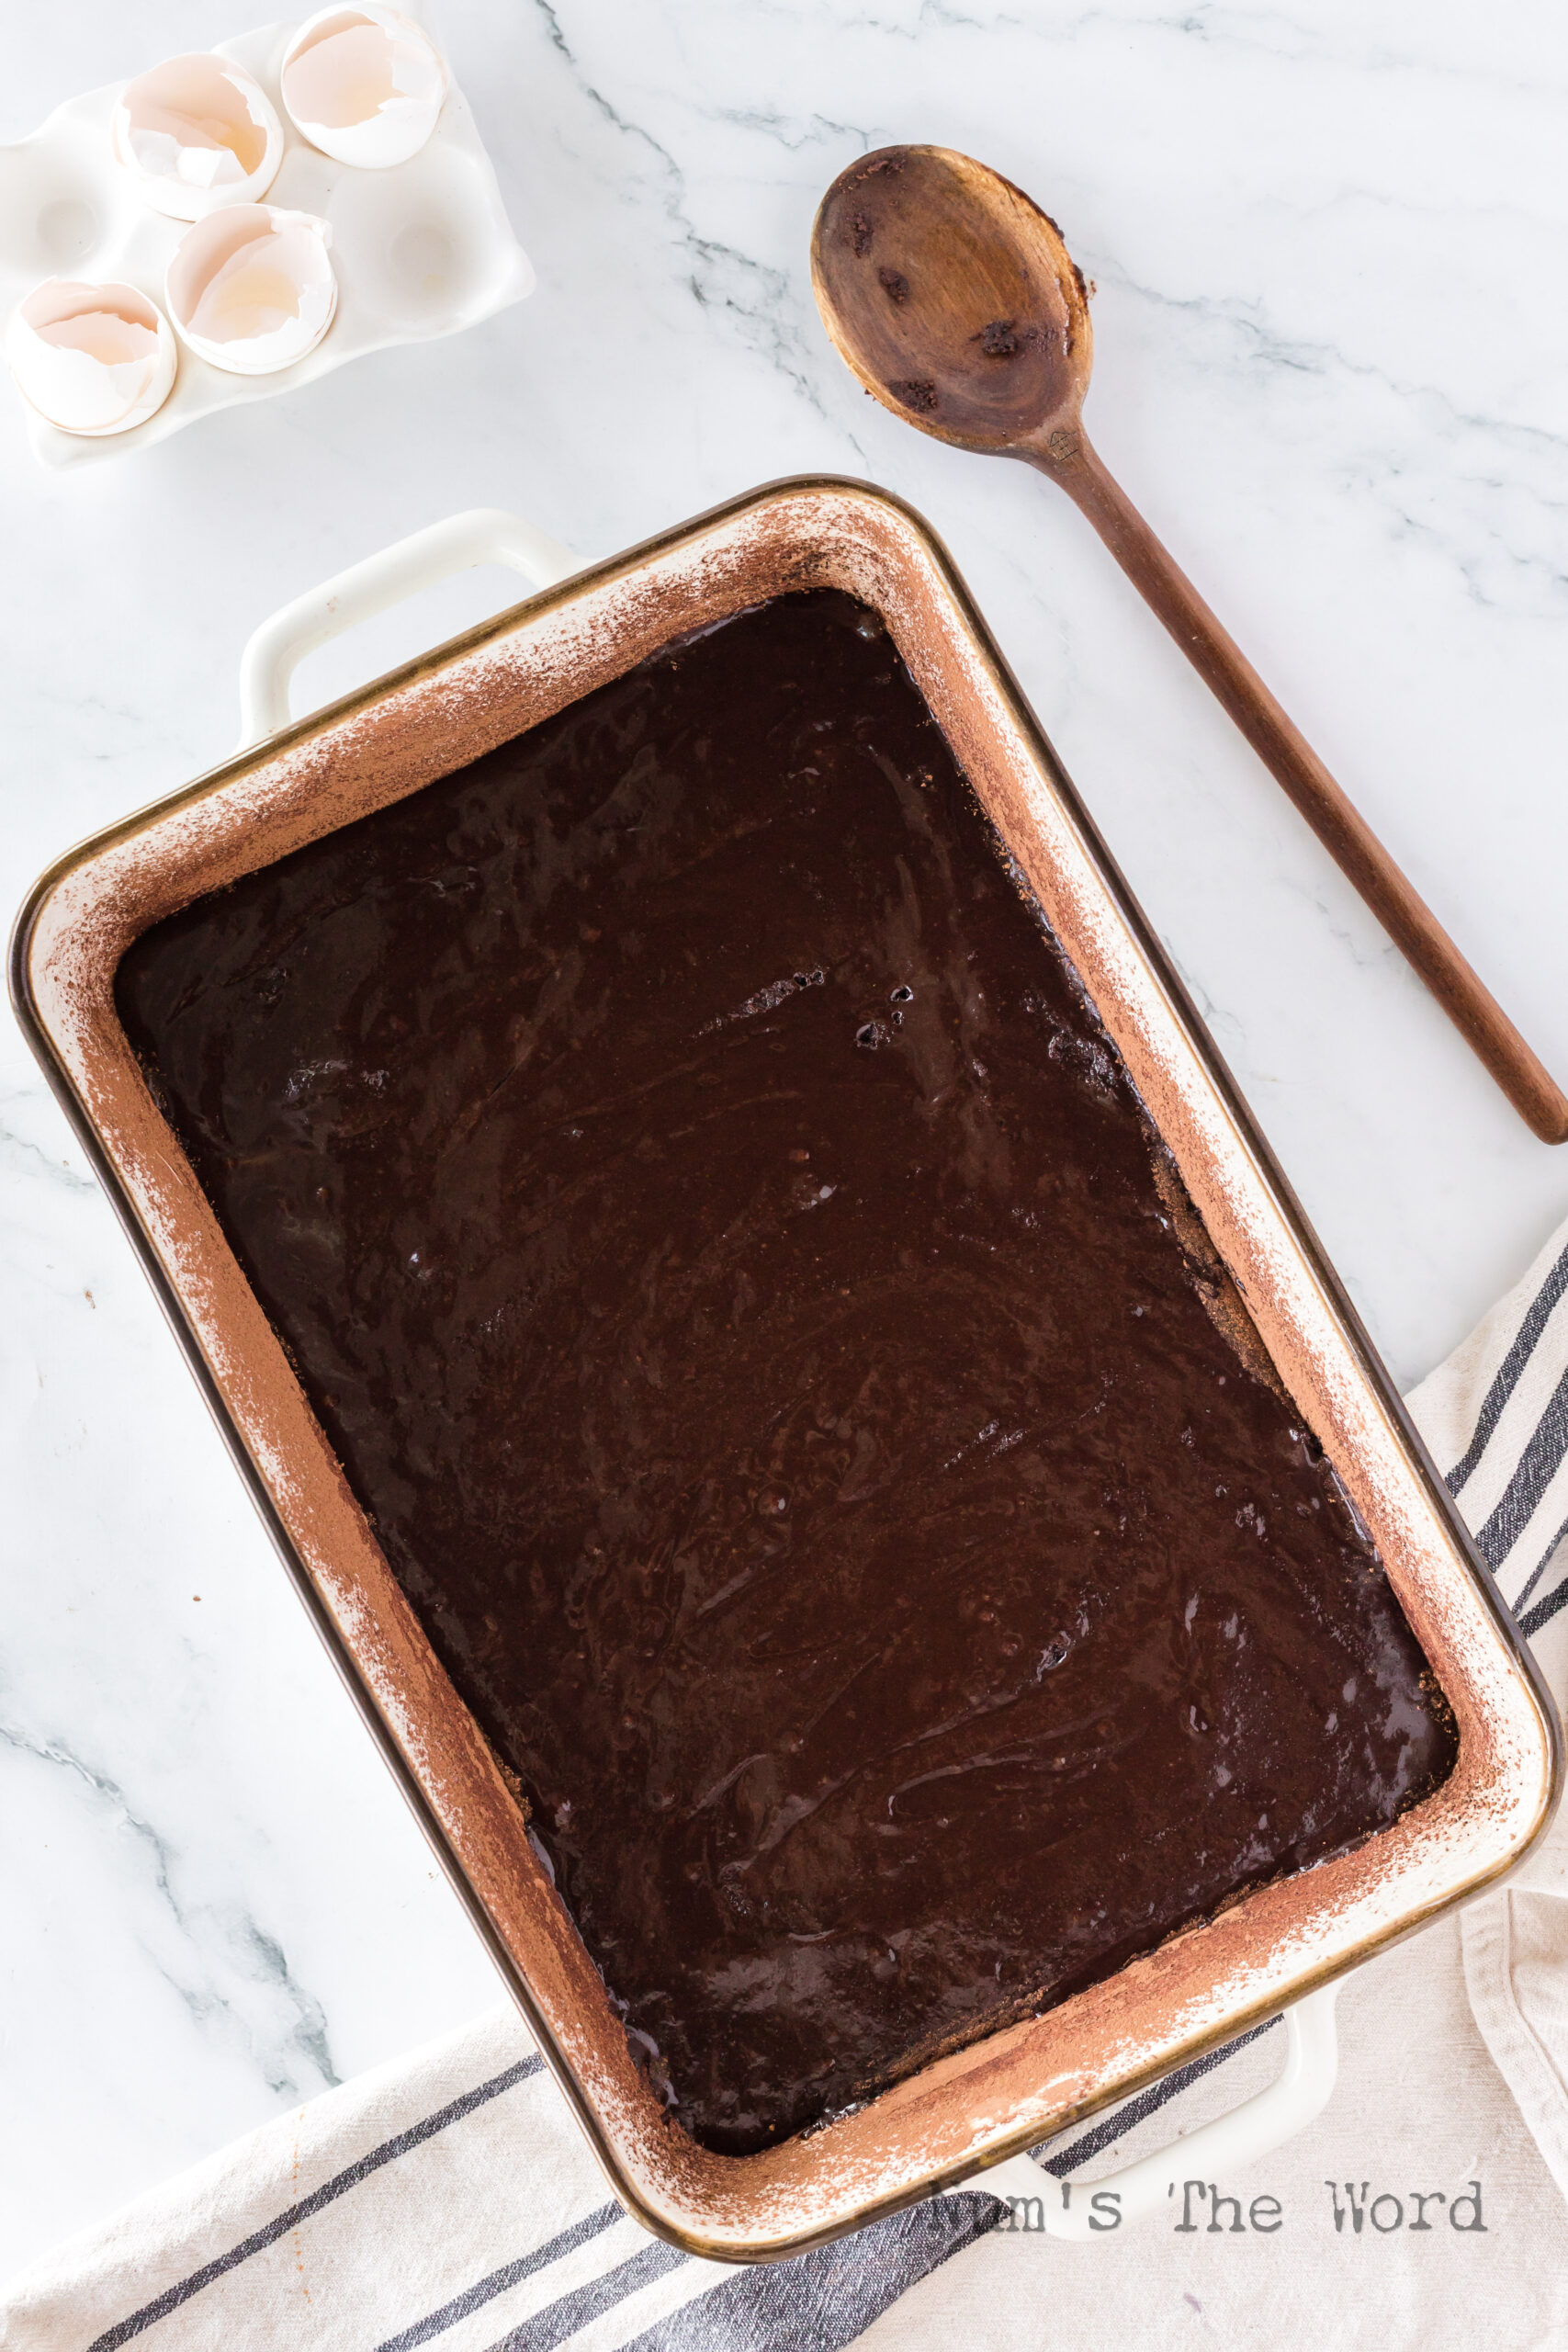 Brownie batter poured into a casserole dish